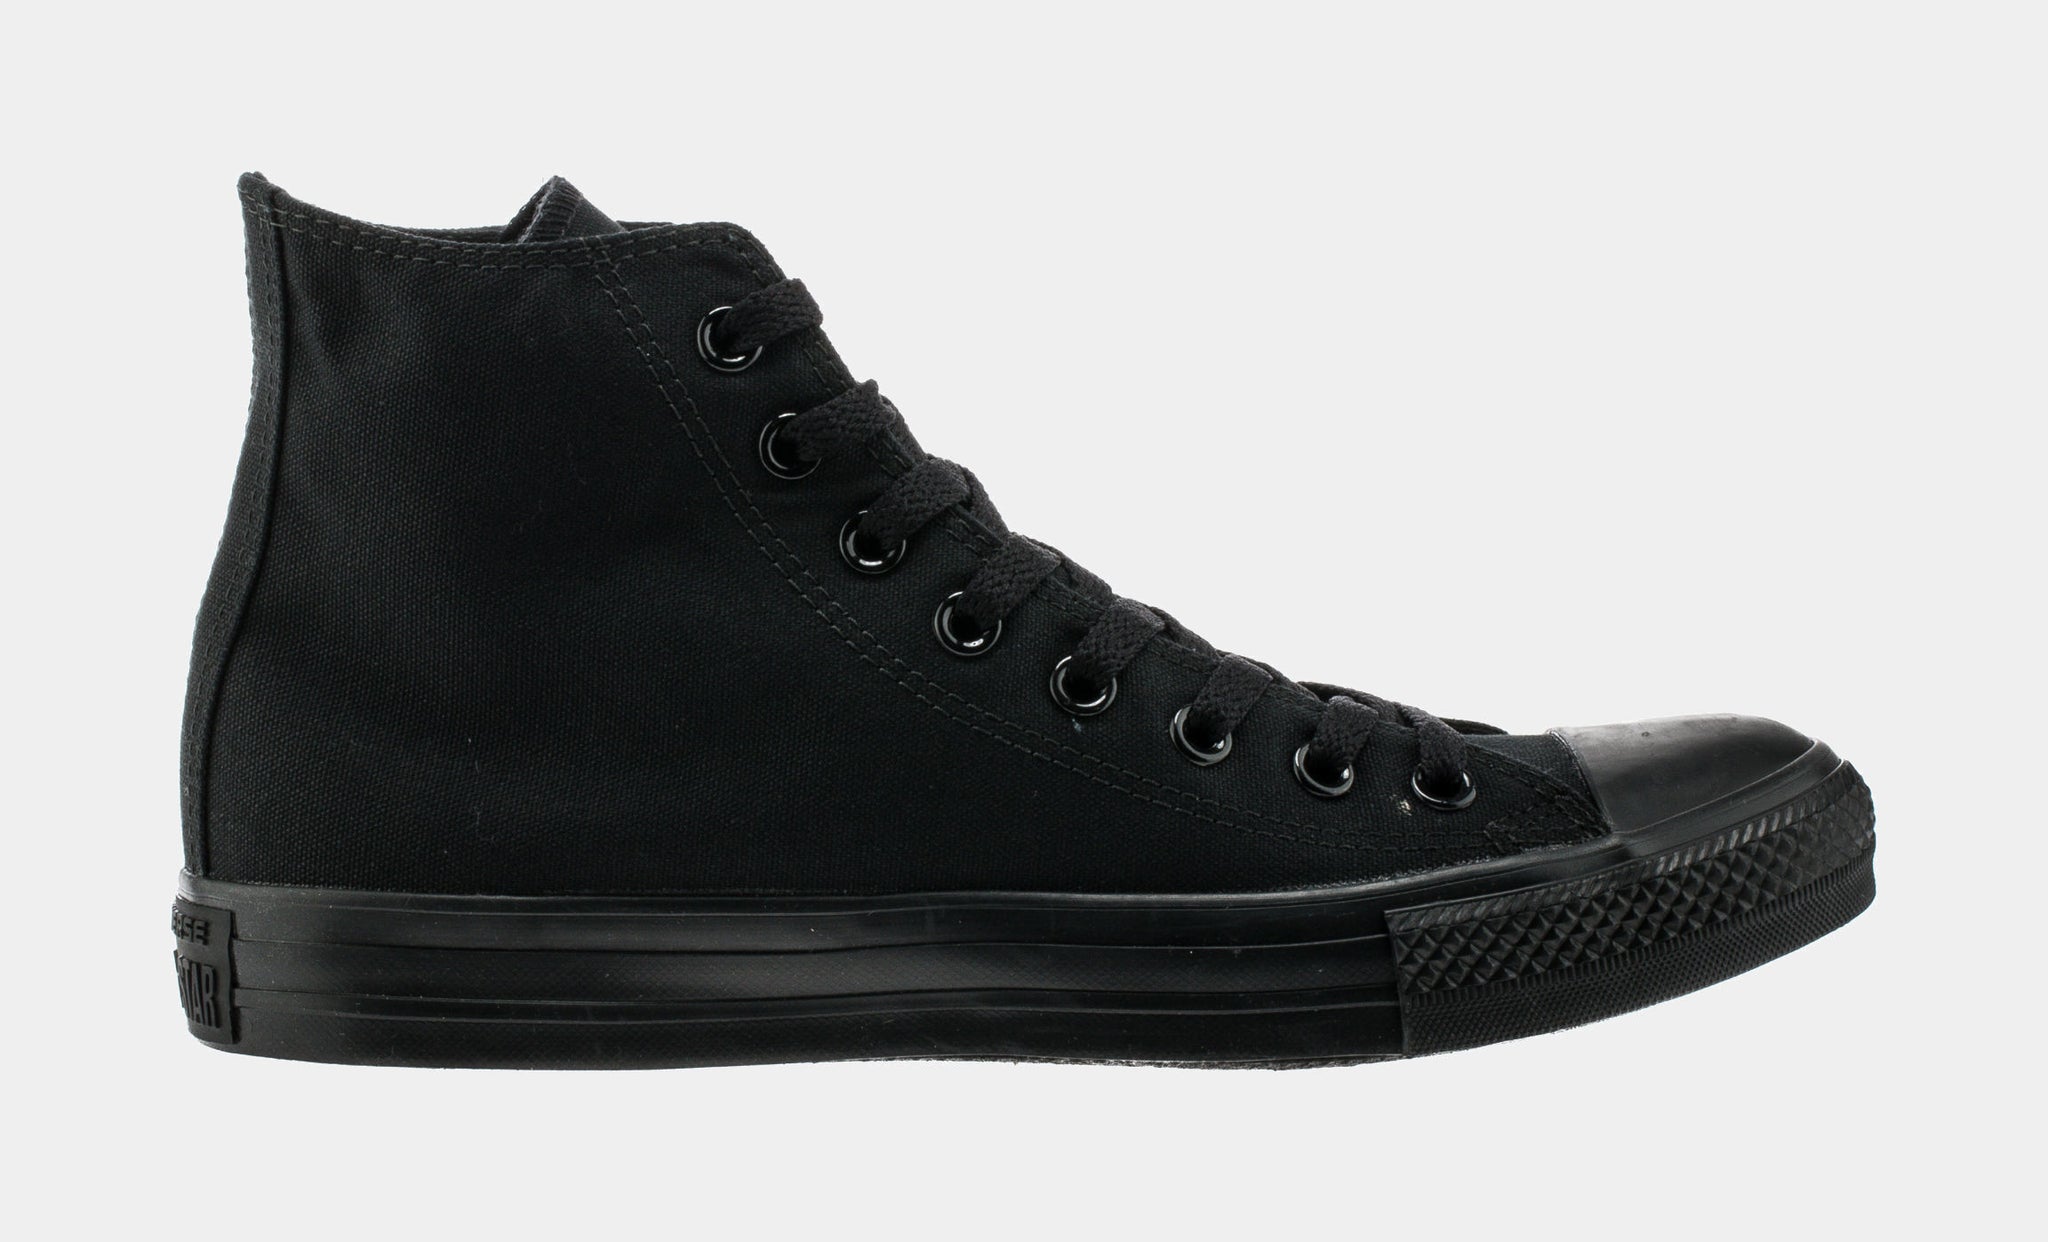 Converse Chuck Taylor All Star Classic Colors High Solid Canvas Mens Lifestyle Shoe Black Black M3310 – Shoe Palace